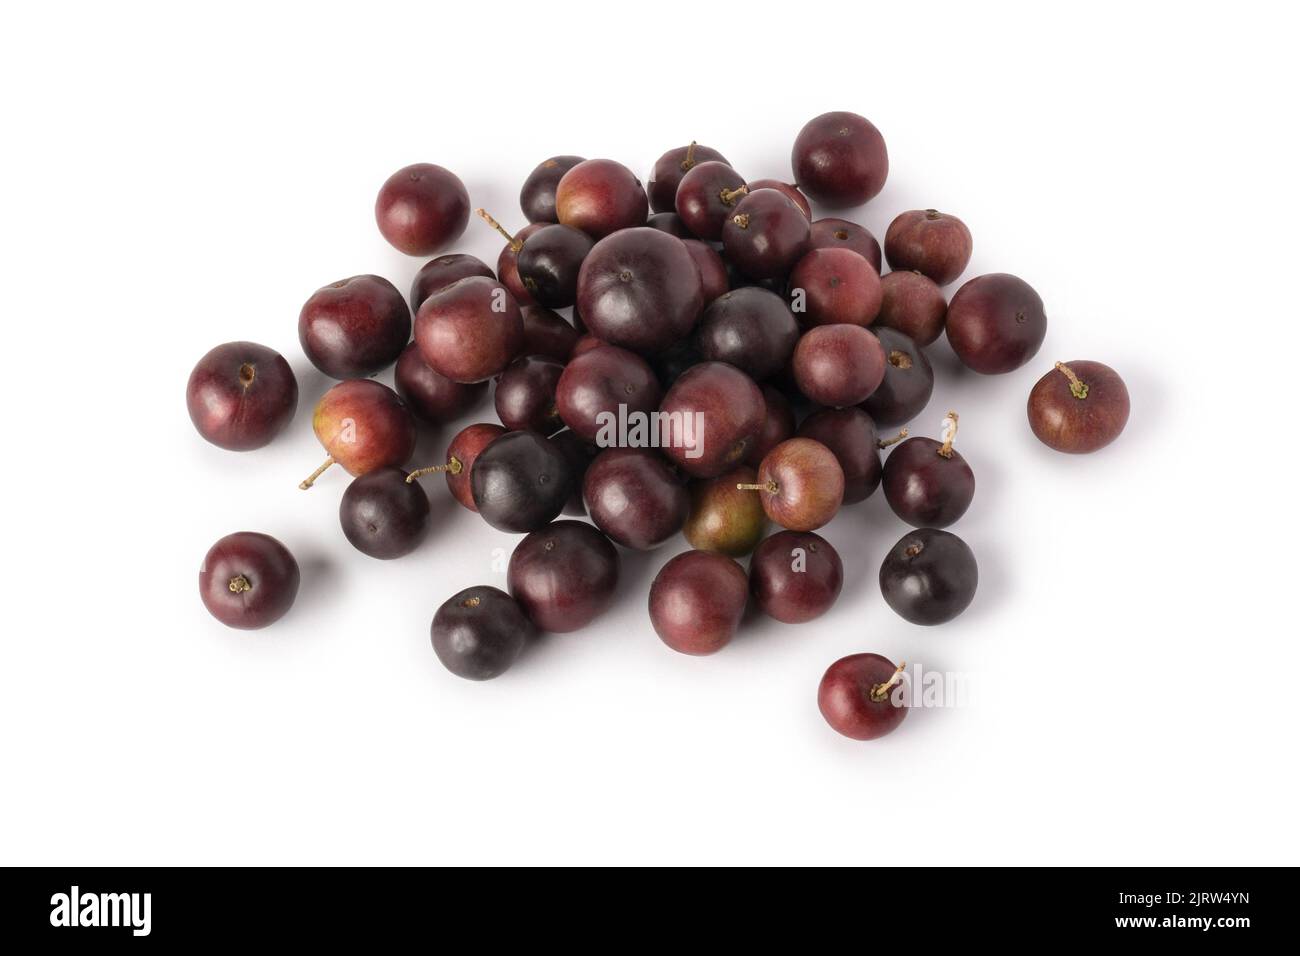 heap of governor's plum fruits, flacourtia indica, also known as ramontchi, madagascar plum or indian plum, reddish black fleshy fruits isolated Stock Photo